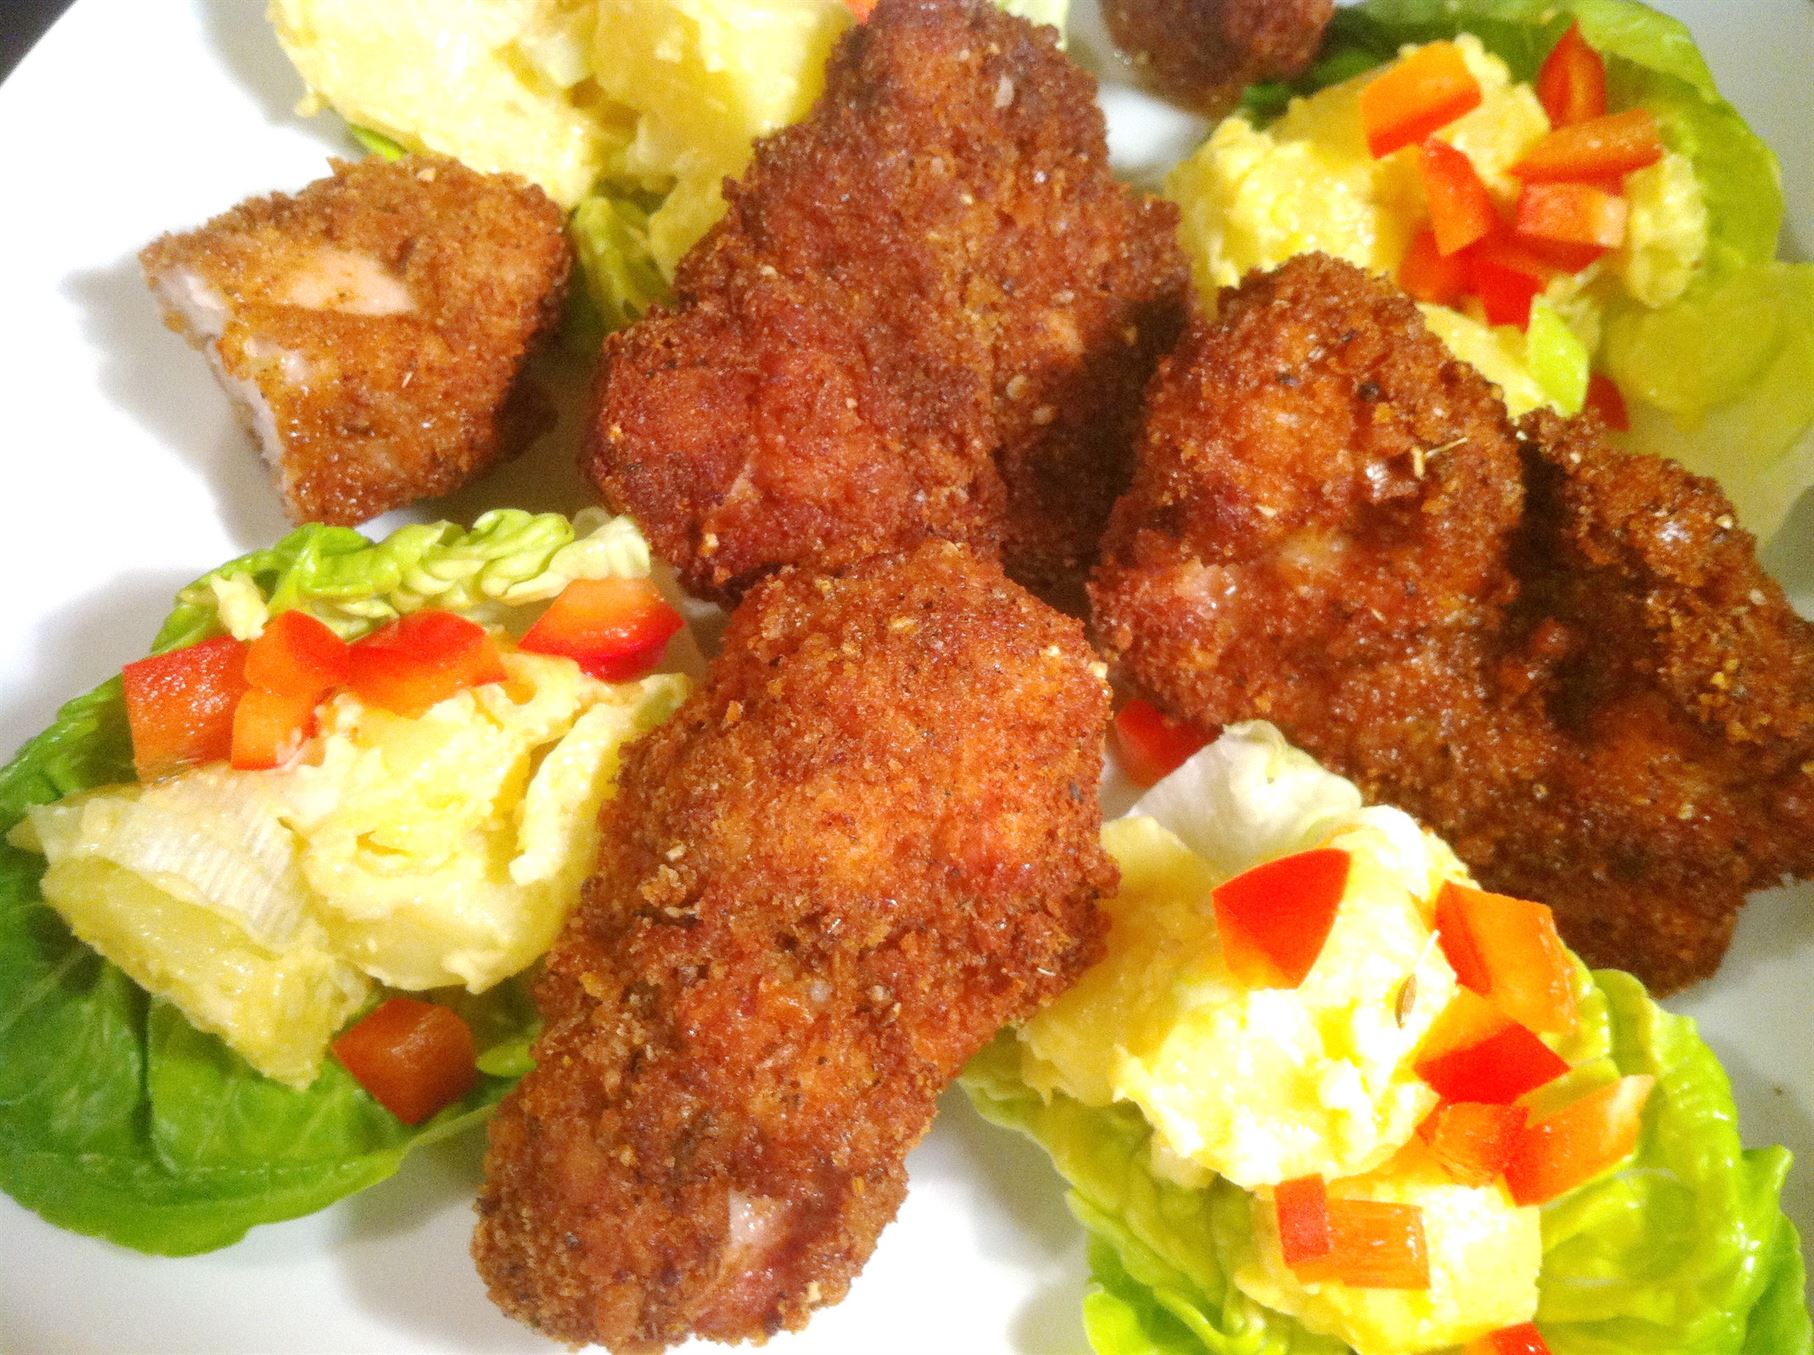 Hot &#038; Spicy Chicken Nuggets with American Mustard Potato Salad, Lay The Table